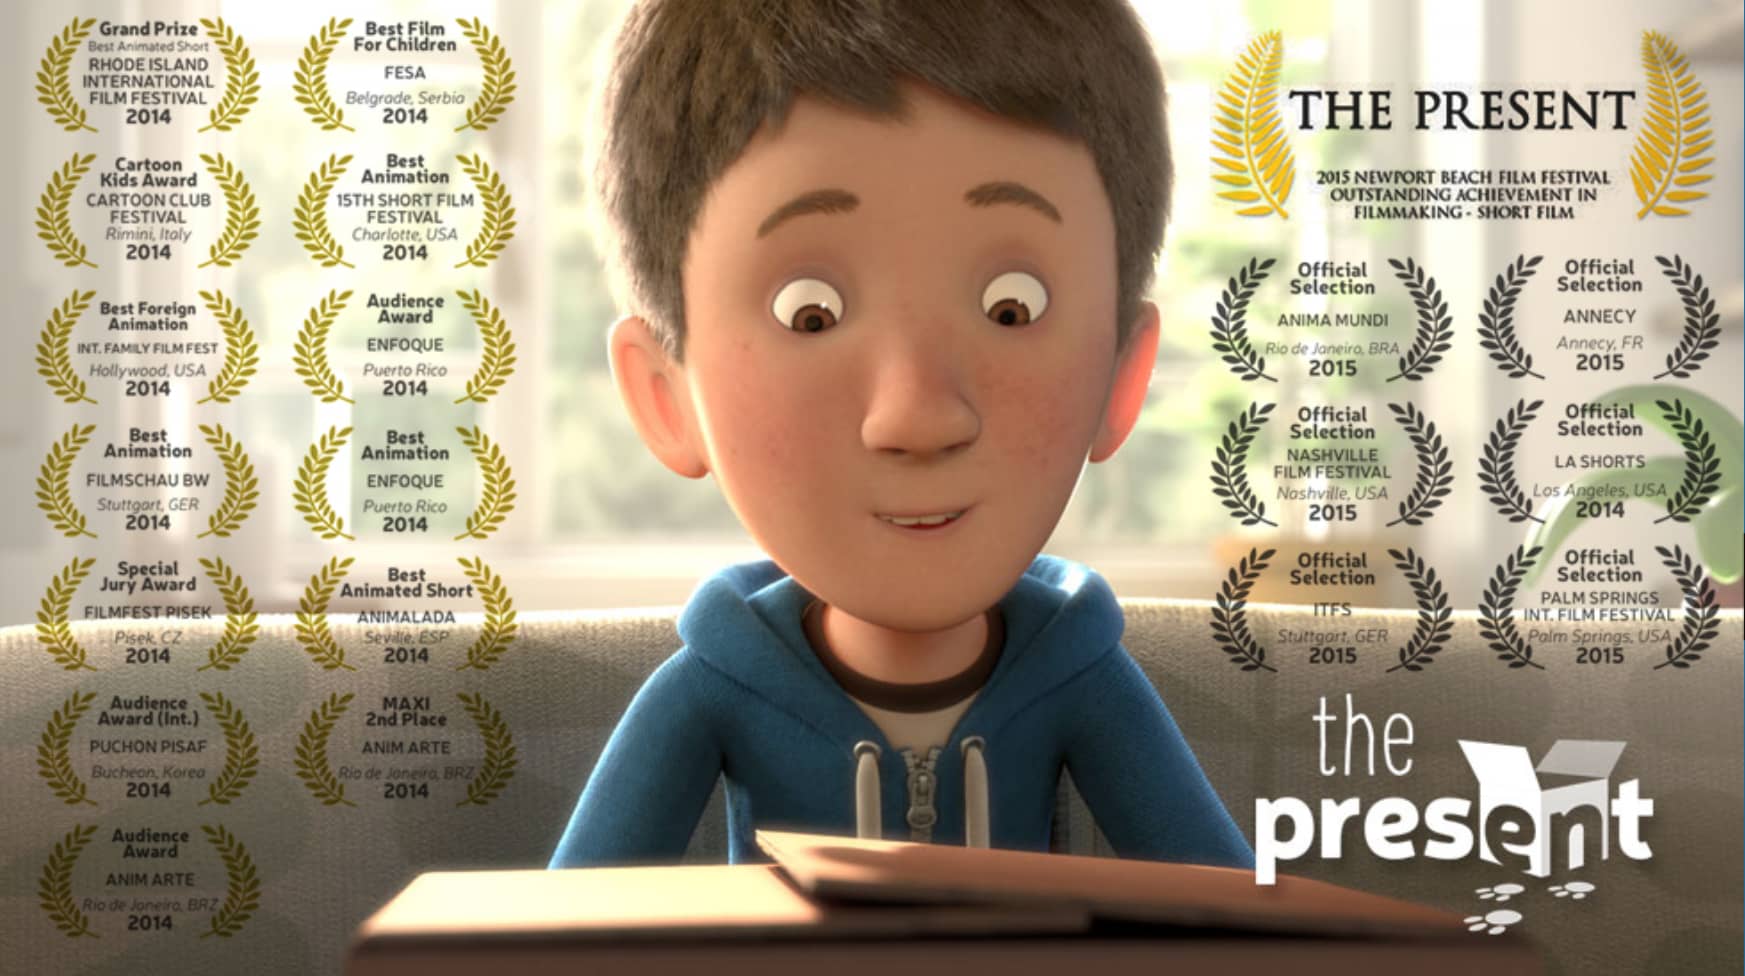 Inspiring Animated Film About A Boy Receiving An Unexpected Gift Teaches Us An Unexpected Life Lesson